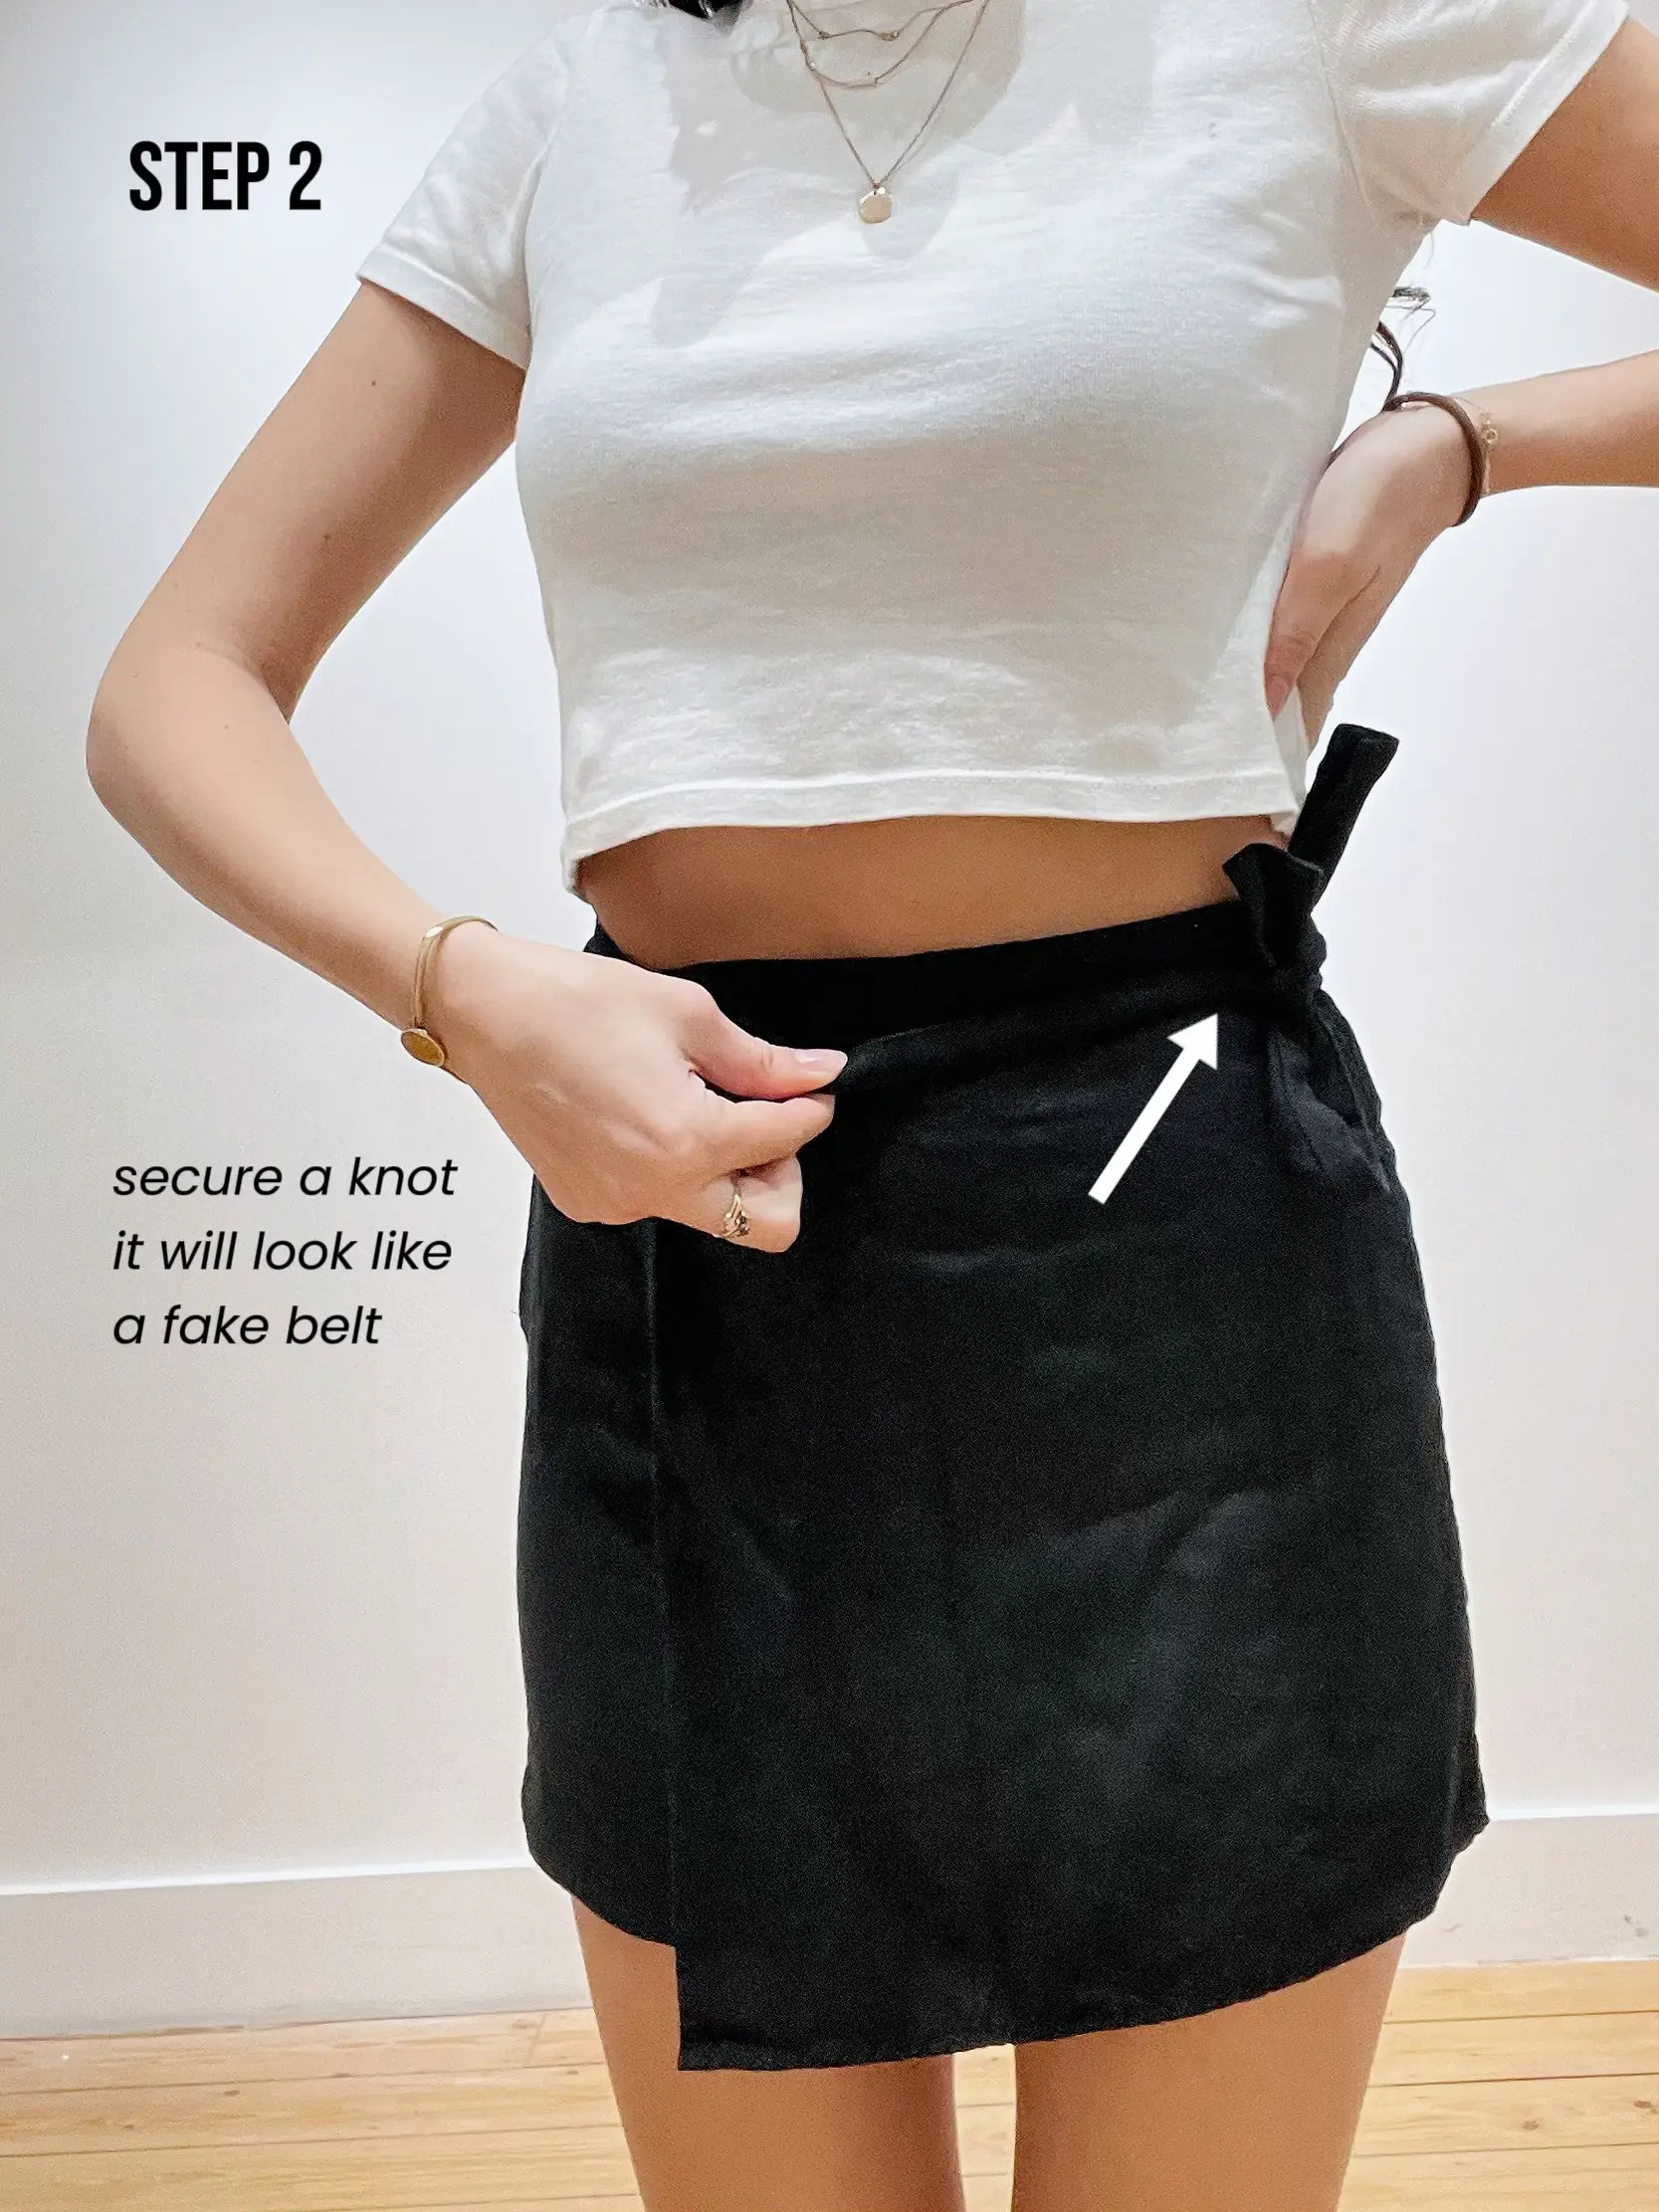 STOP BUNCHING YOUR SWEATER INTO YOUR BRA OR BELT TO CROP TOP